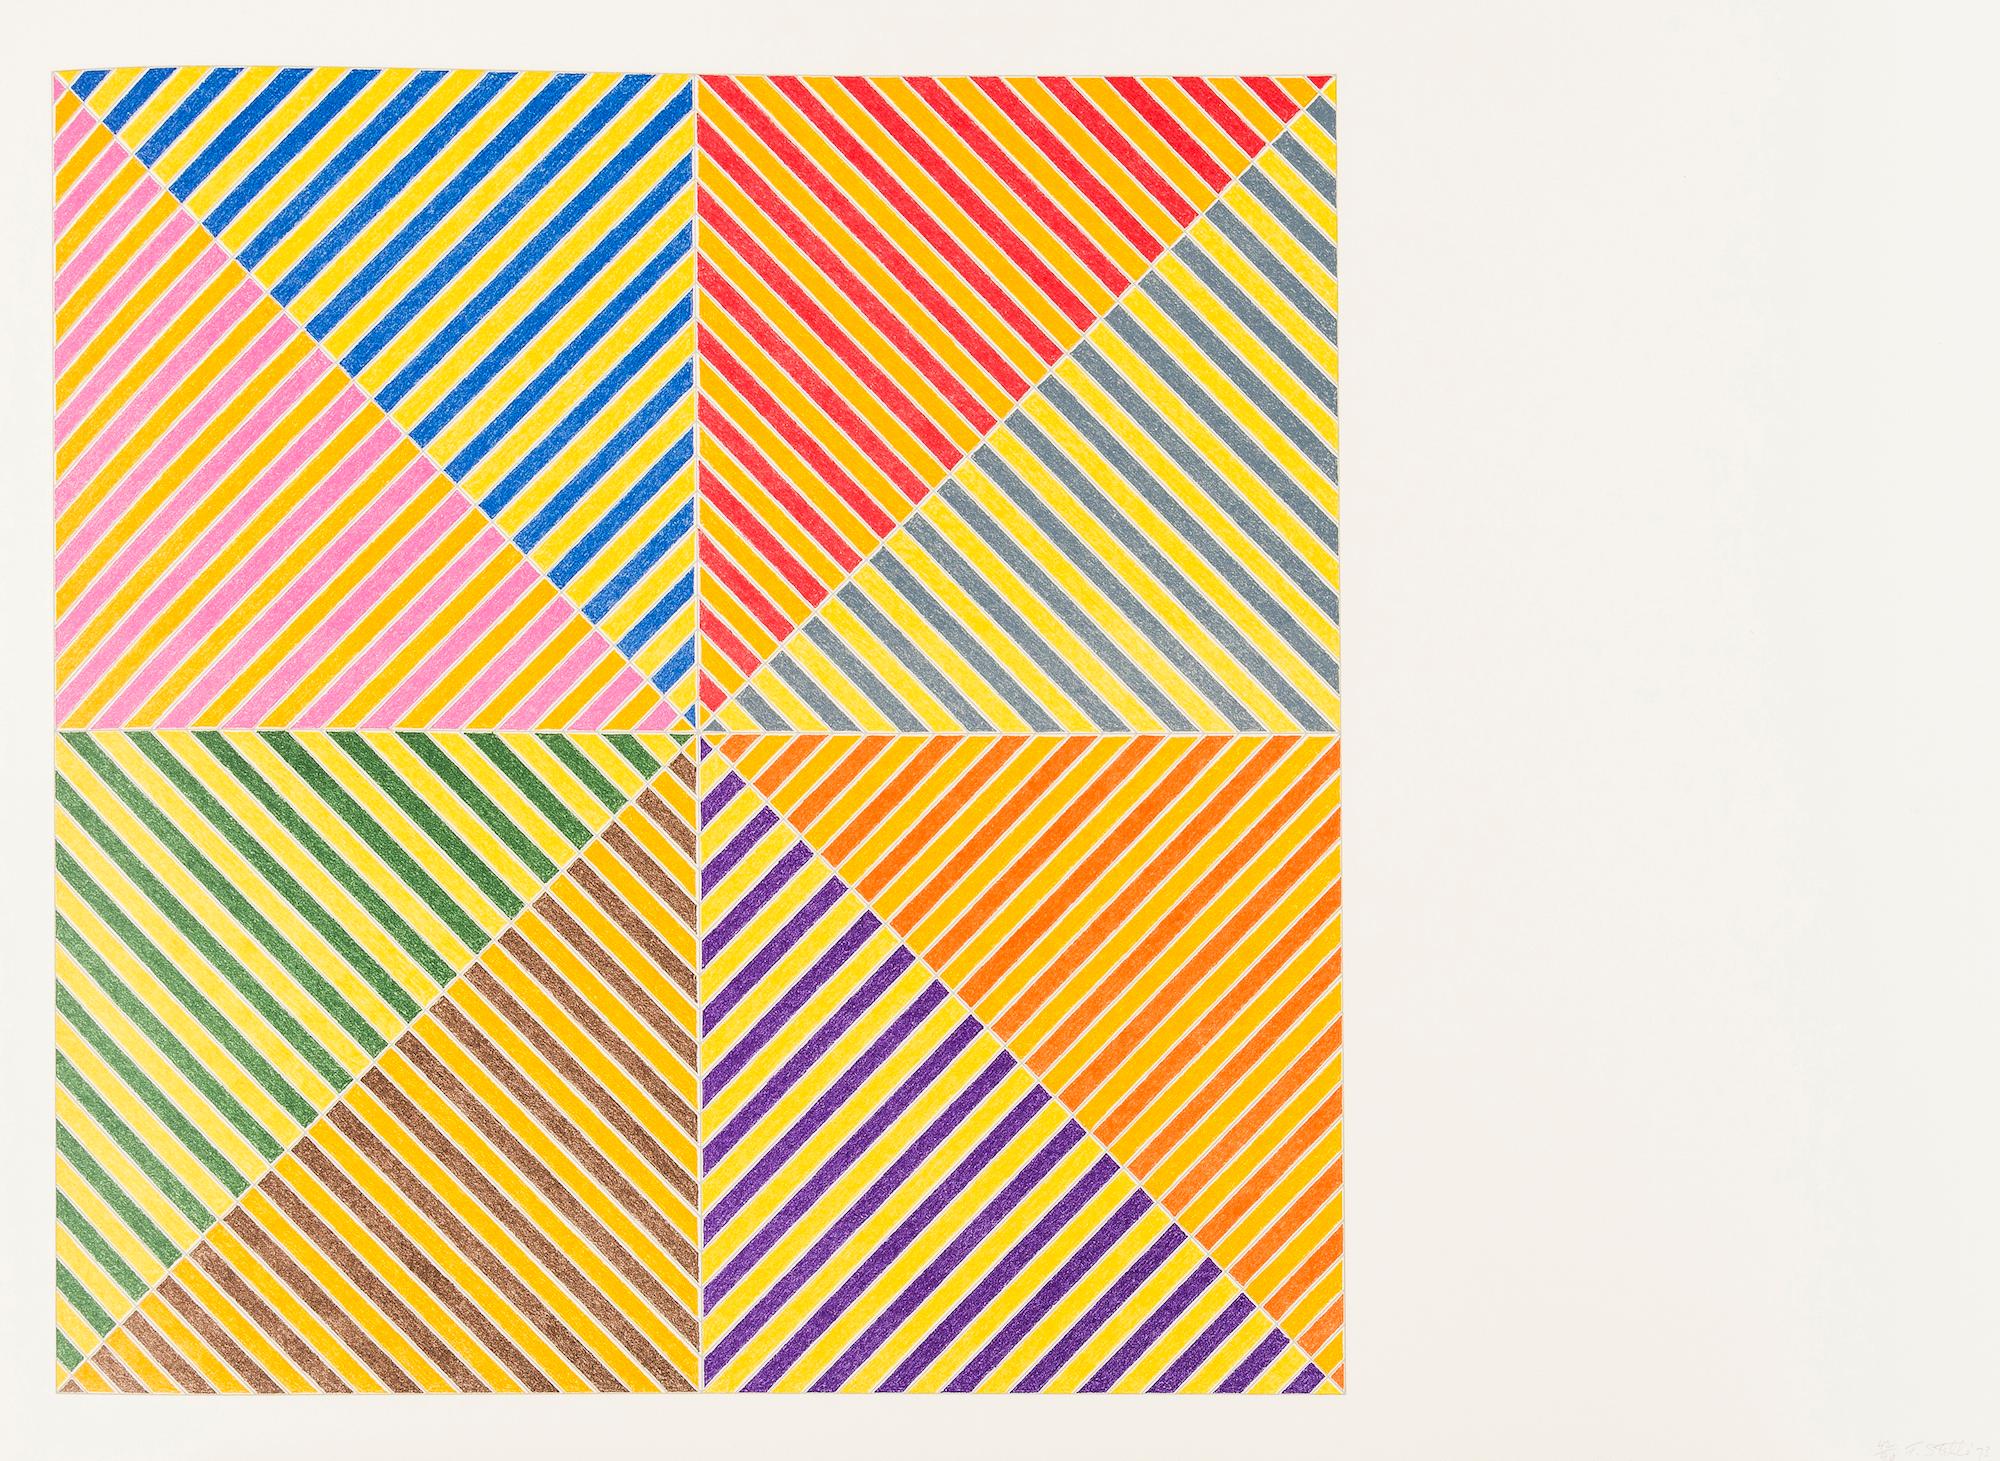 FRANK STELLA
Sidi Ifni, 1973

Offset lithograph in colours, on Copperplate Deluxe paper
Signed, dated and numbered in pencil from the edition of 7/90
From Hommage à Picasso
Co-published by Propyläen Verlag, Berlin and Pantheon-Presse, Rome
Image: 